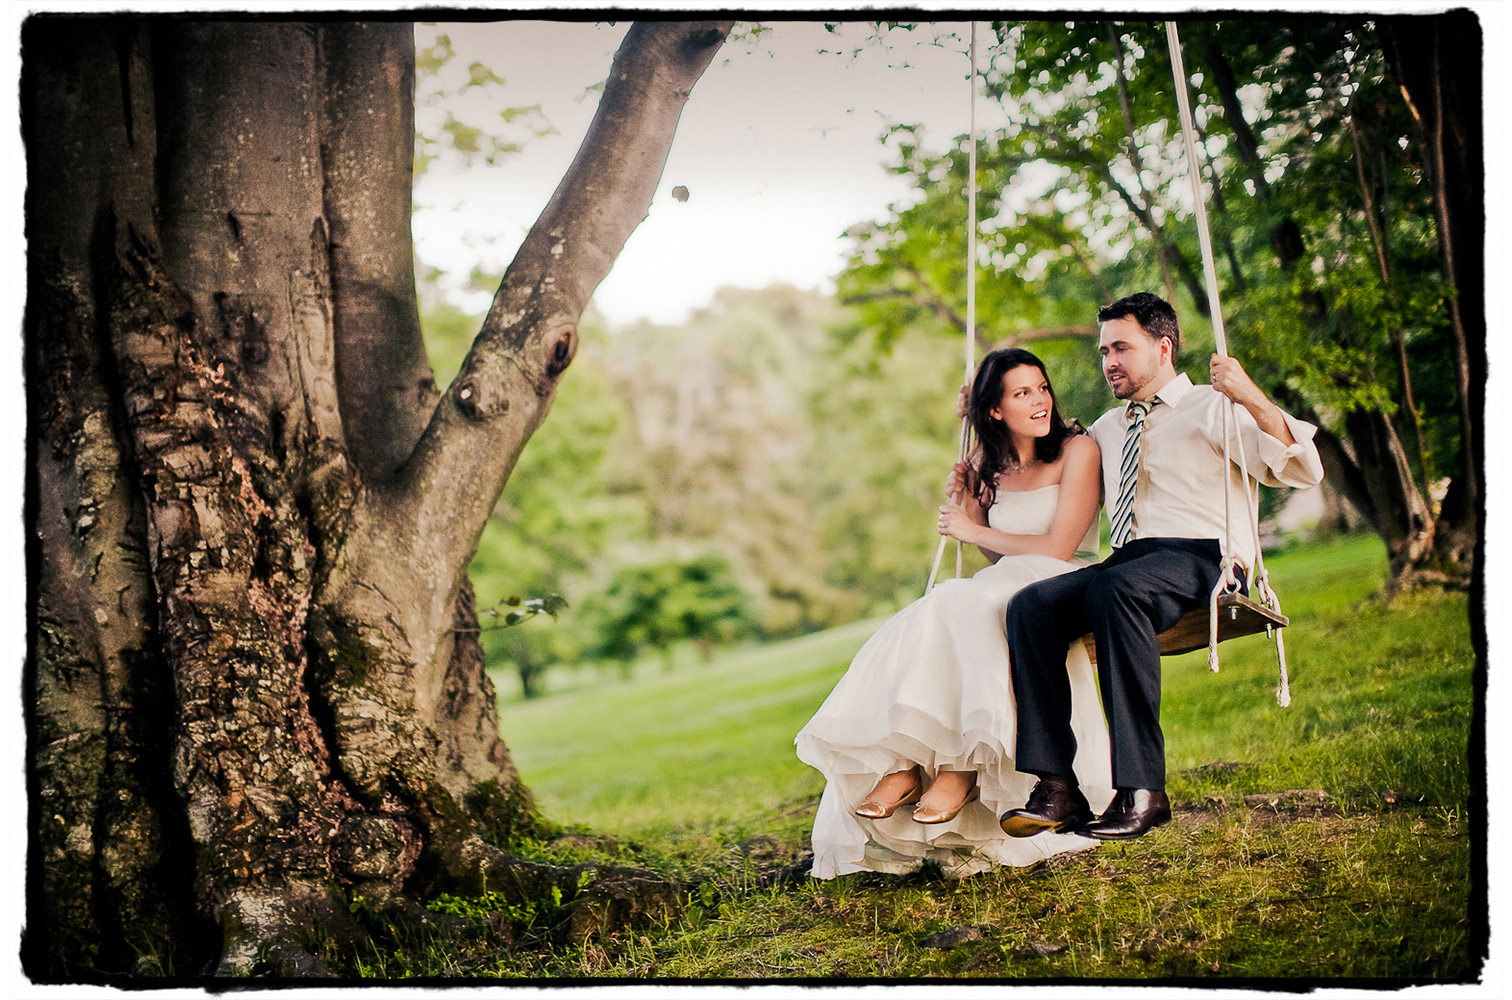 A couple takes time with me for some 'just married' shots of them enjoying the tree swing at Winthrop Estate.